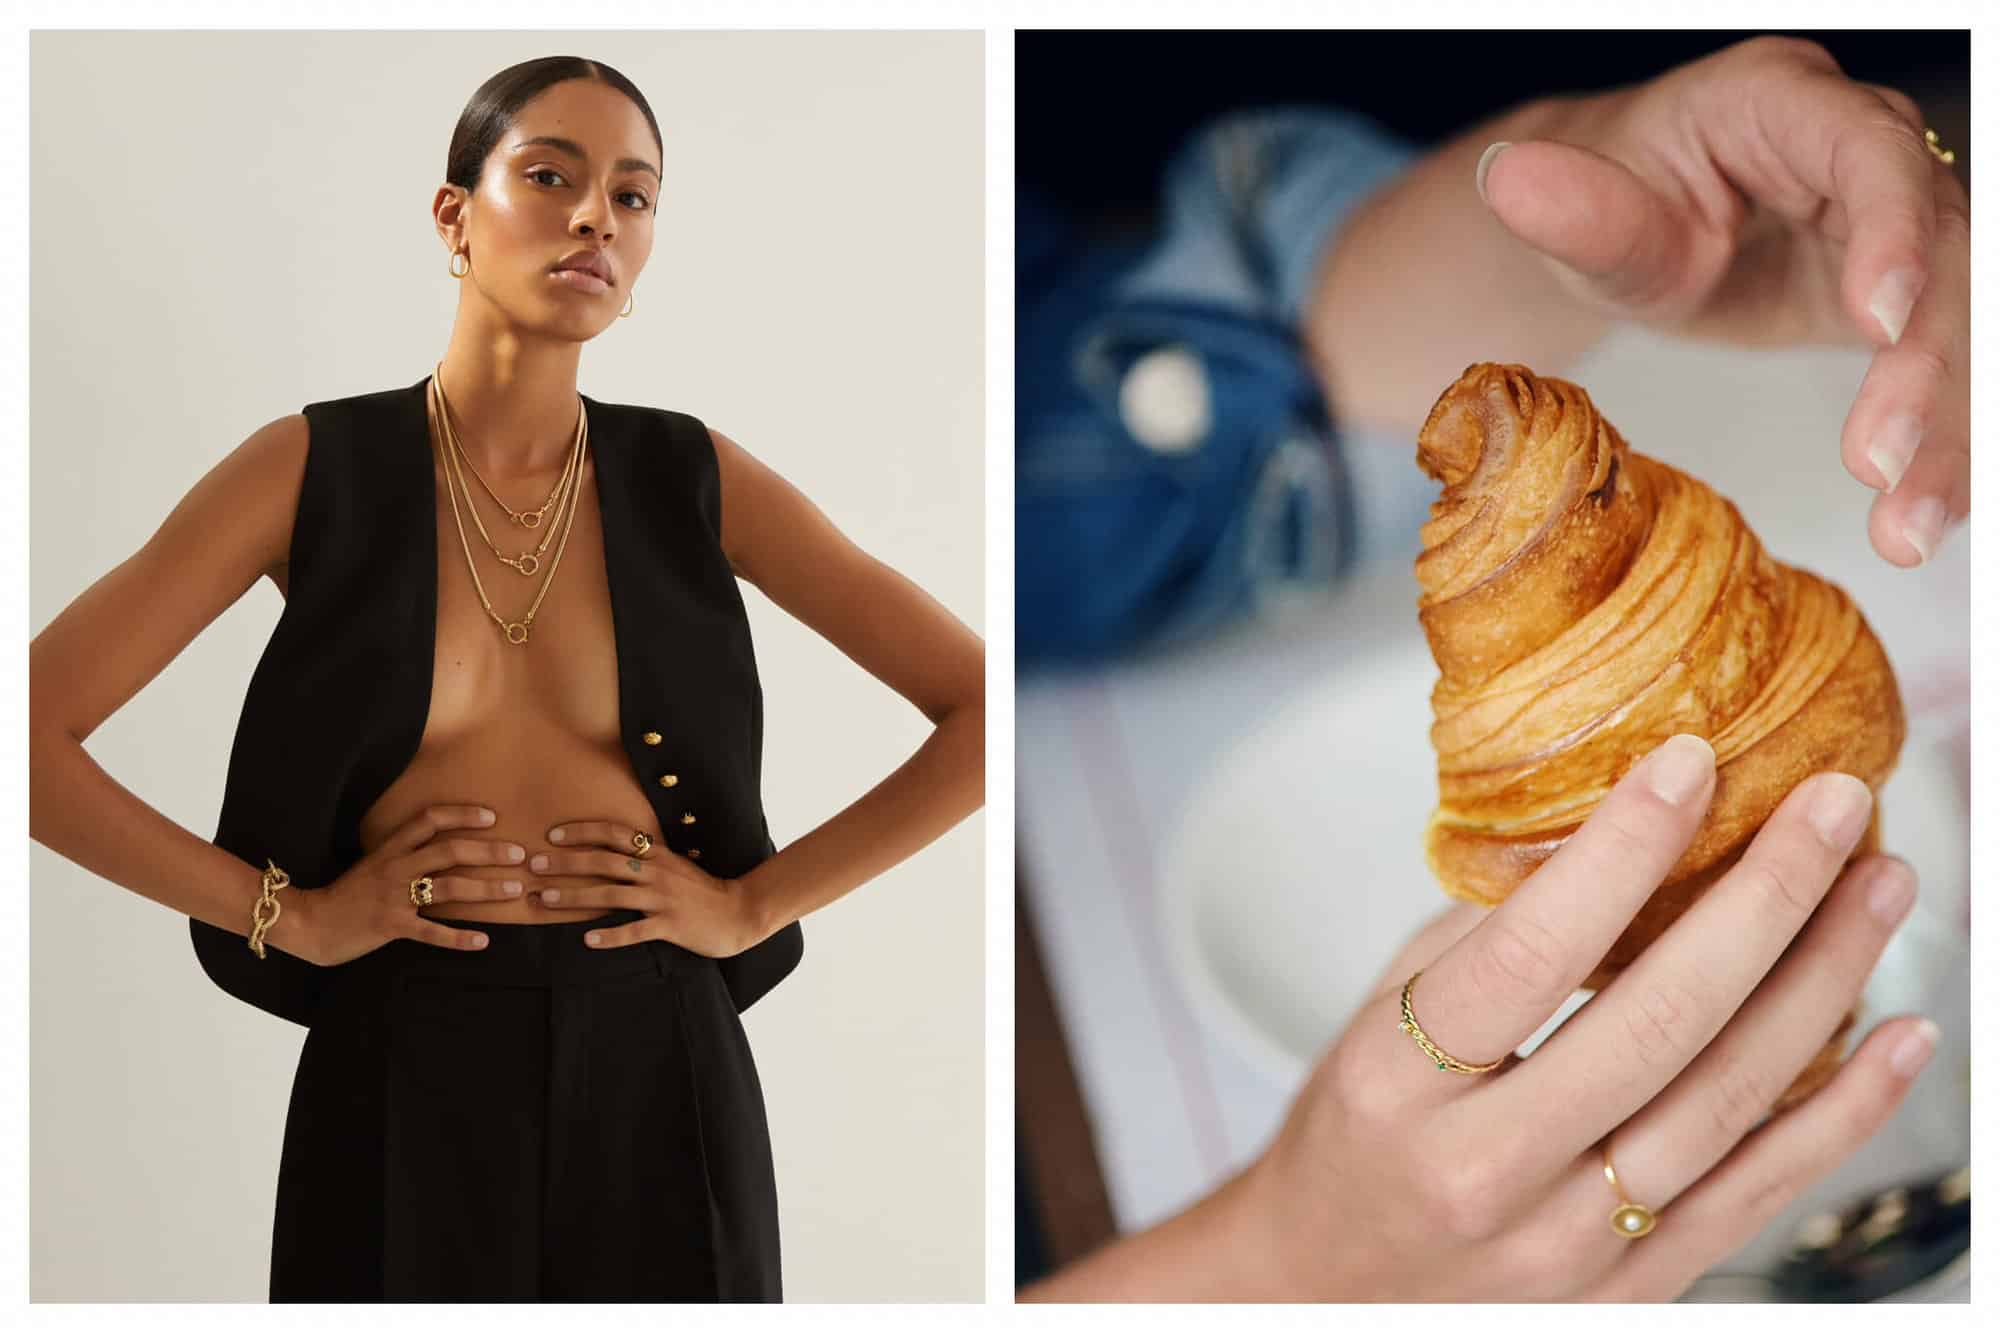 Right: a woman in an open black vest wearing gold jewelry by Bonanza. Right: a woman's hands holding a croissant wearing gold rings by Monsieur Paris. 